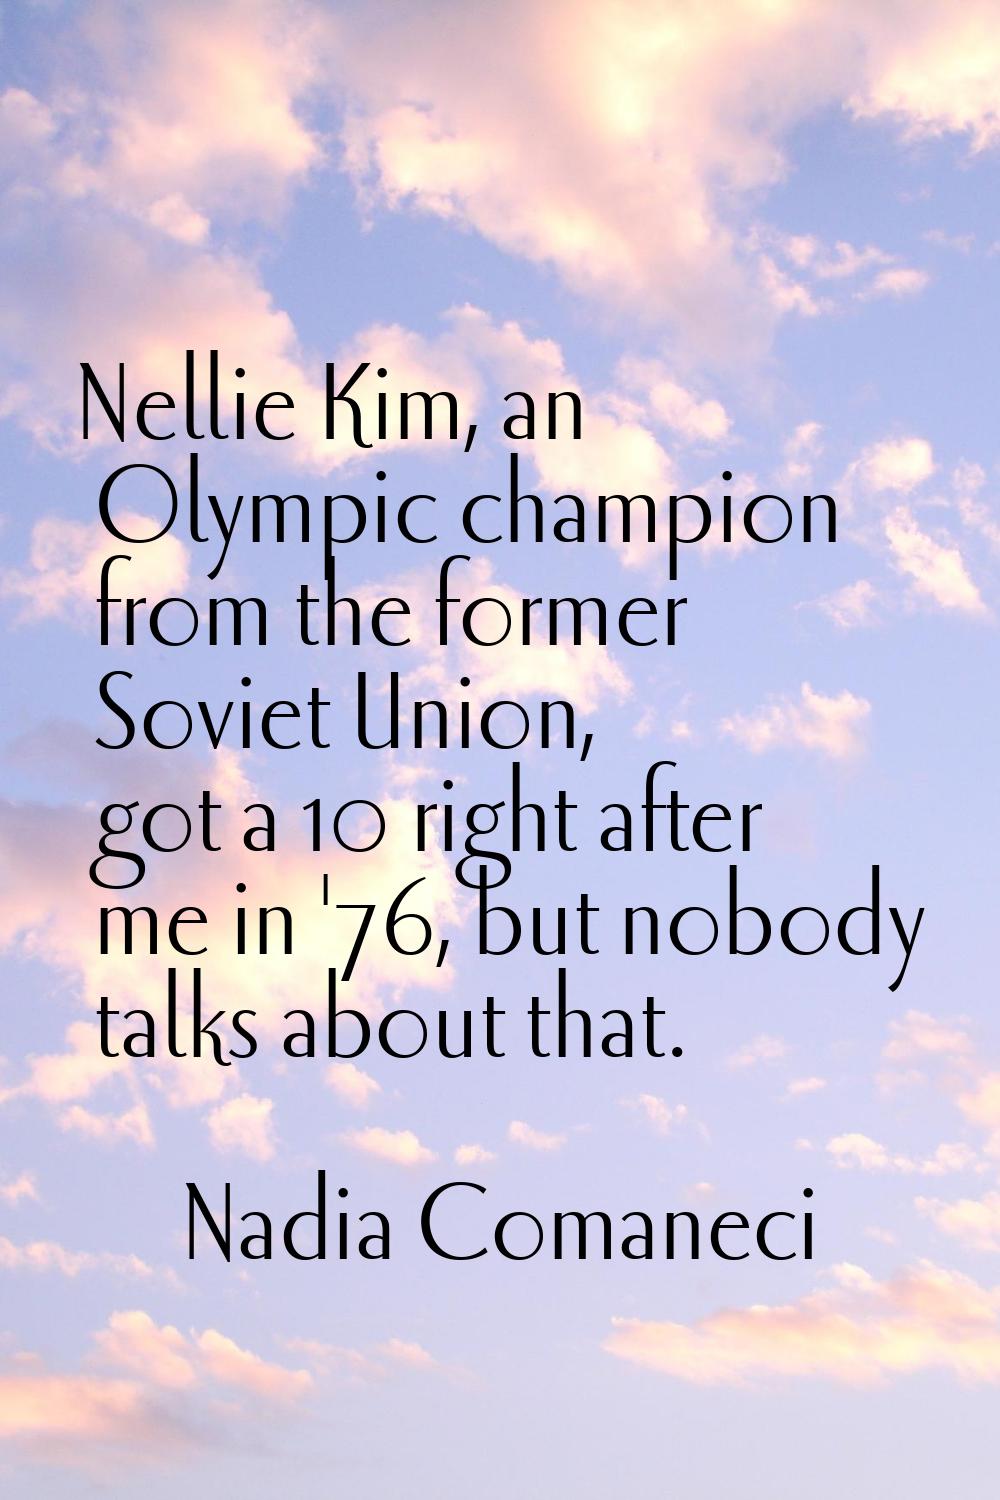 Nellie Kim, an Olympic champion from the former Soviet Union, got a 10 right after me in '76, but n